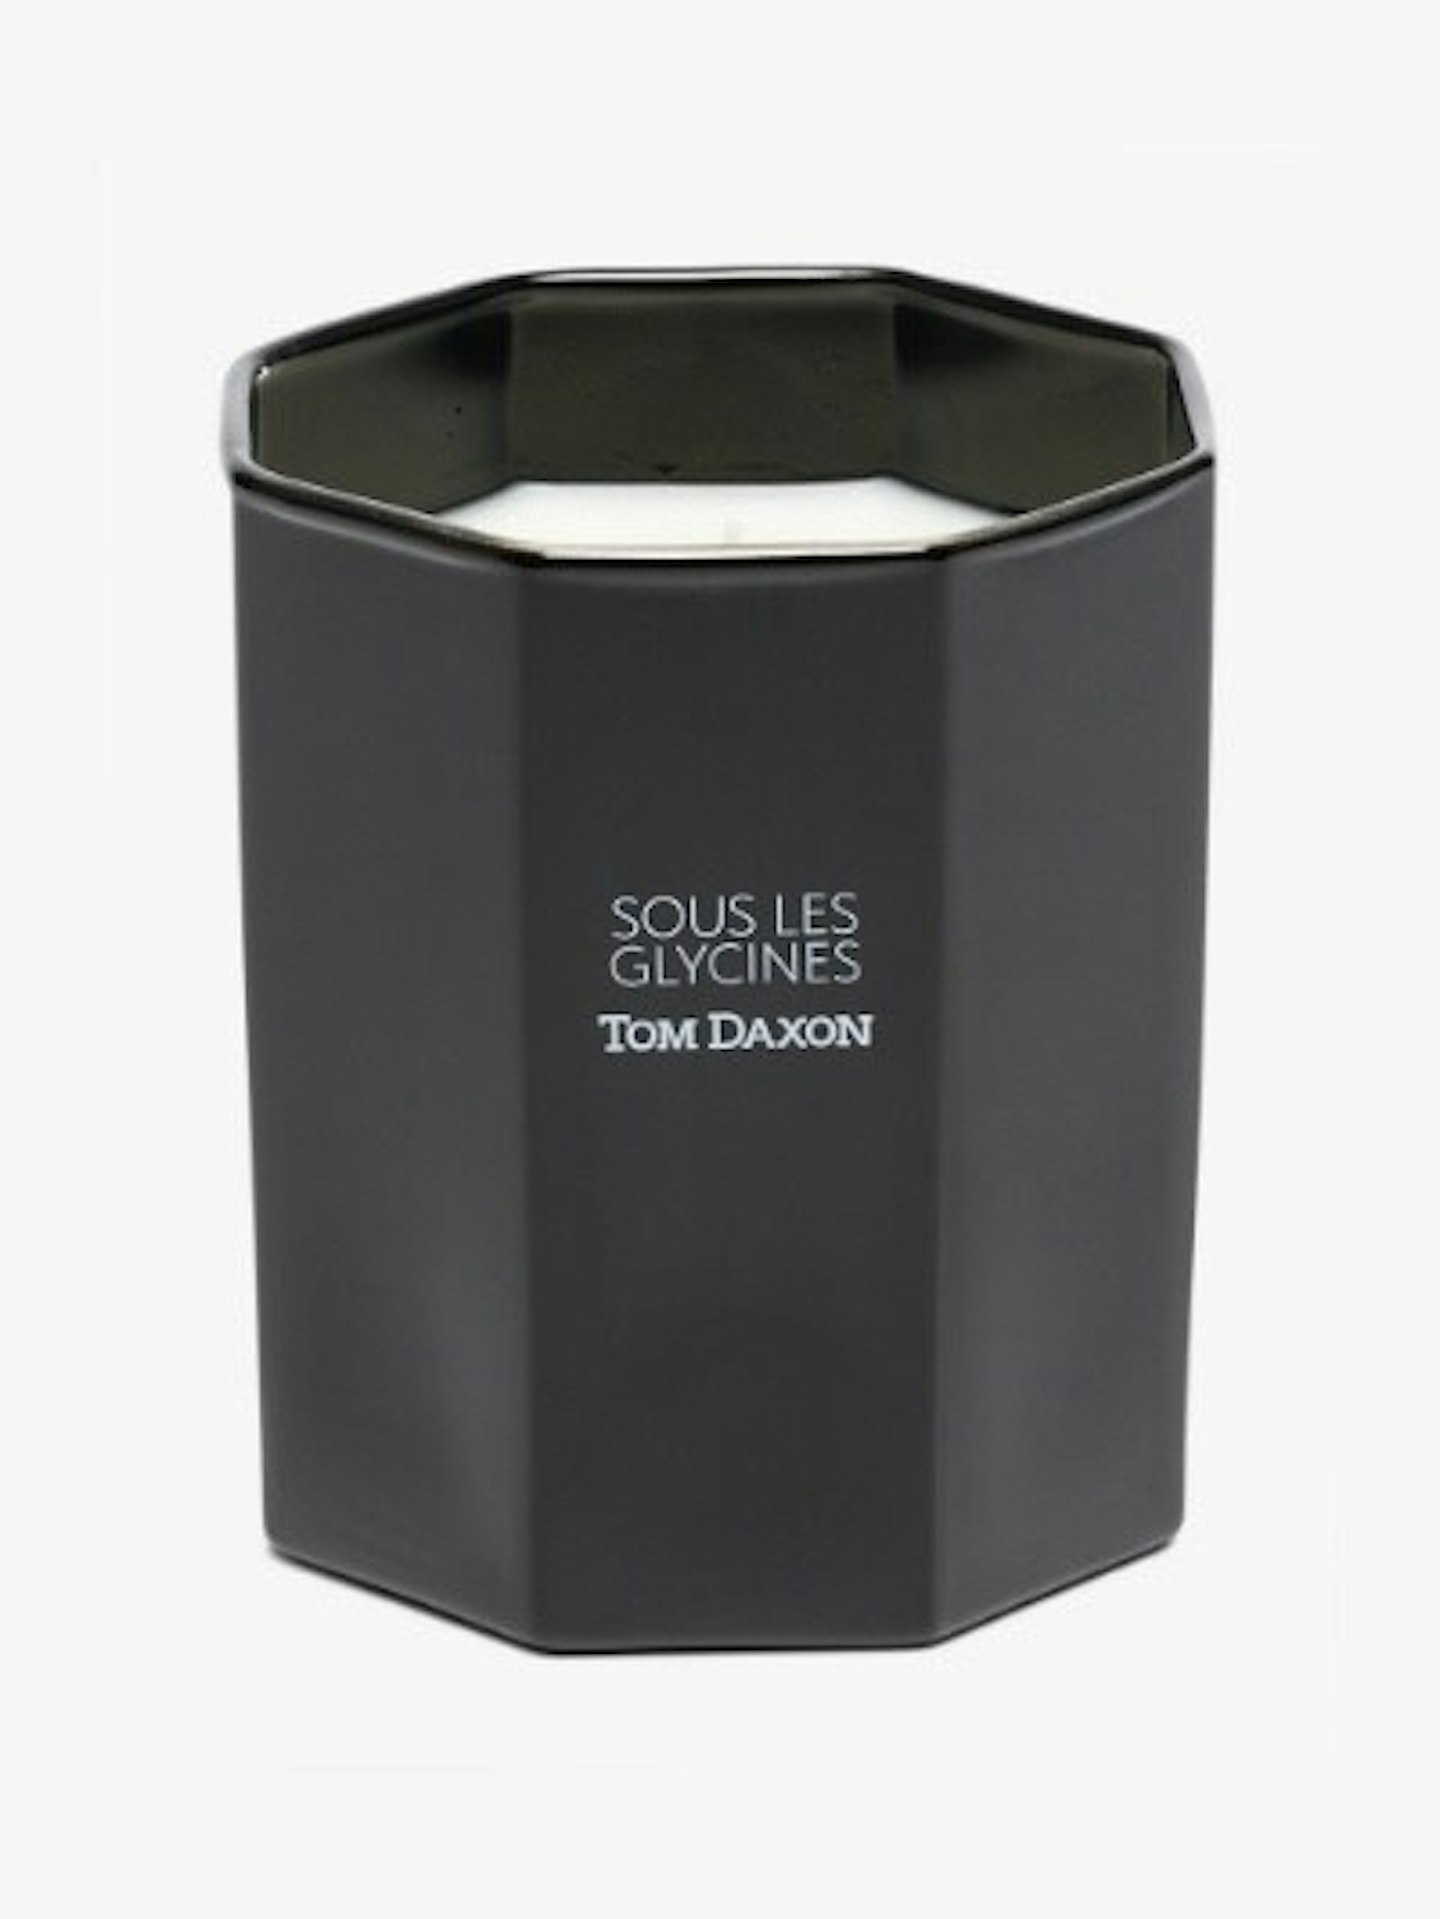 Tom Daxon Sous Les Glycines Scented Candle, £55